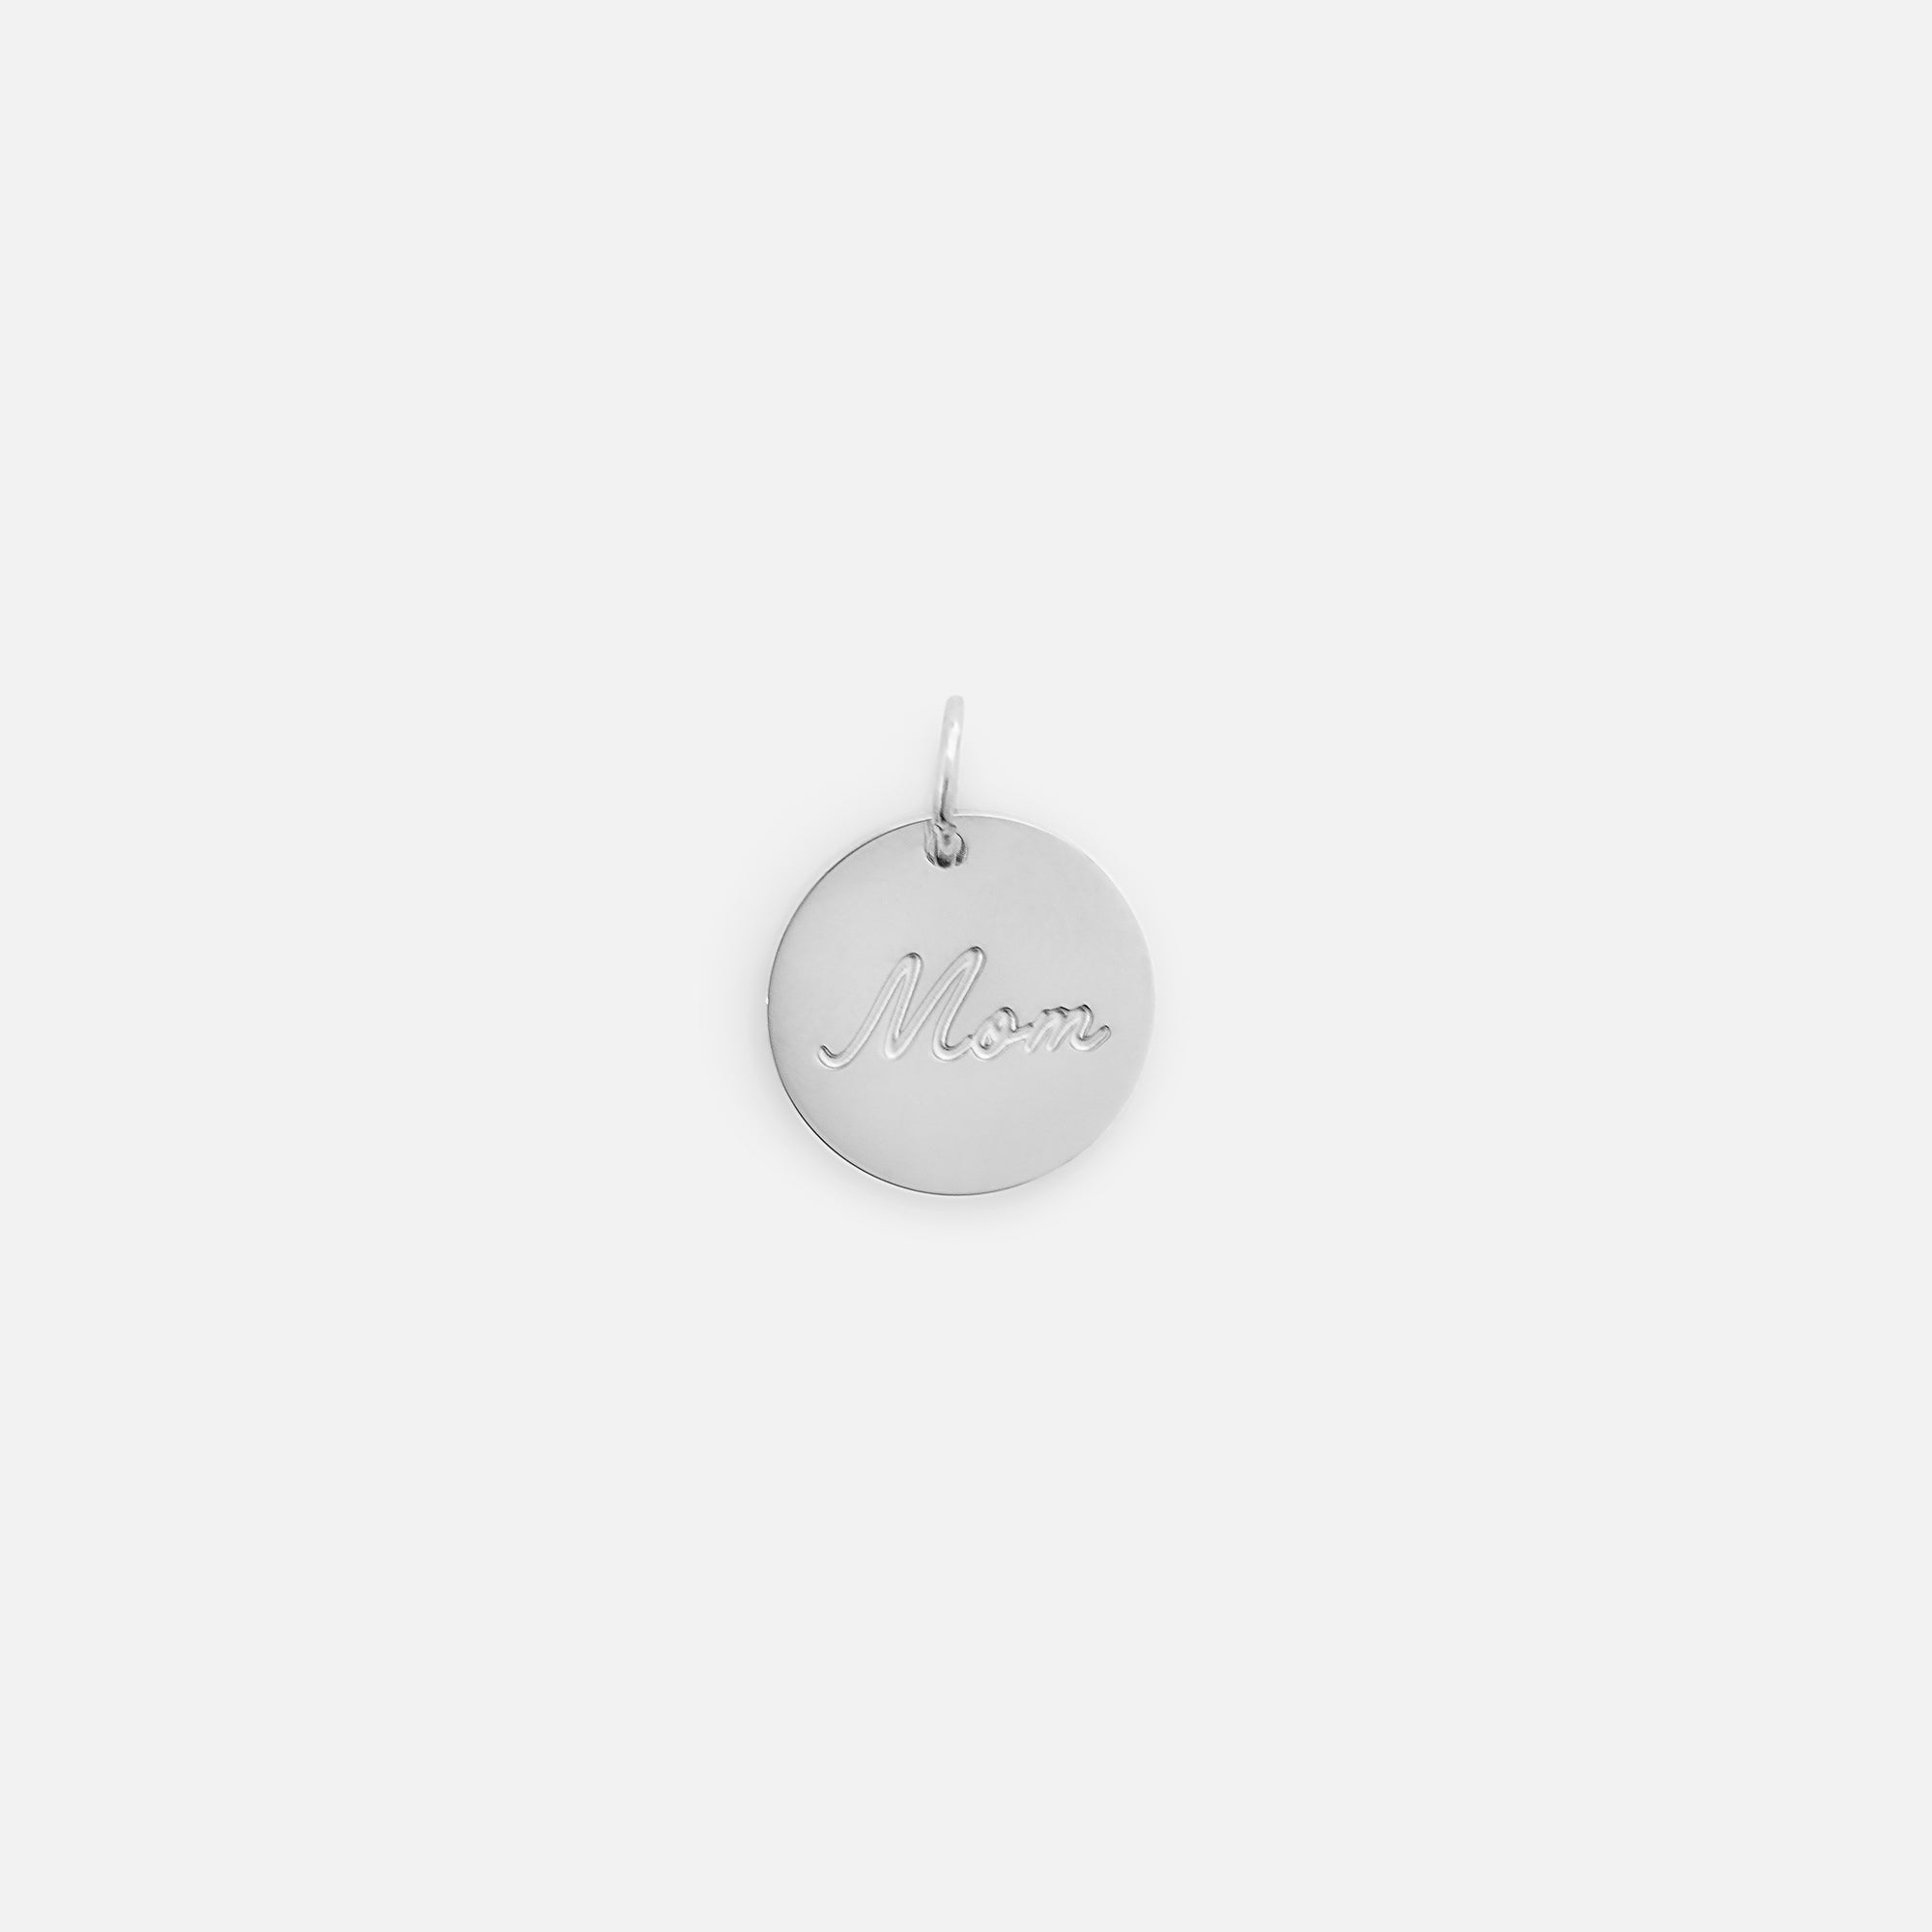 Small symbolic silvered charm engraved "mom" wording